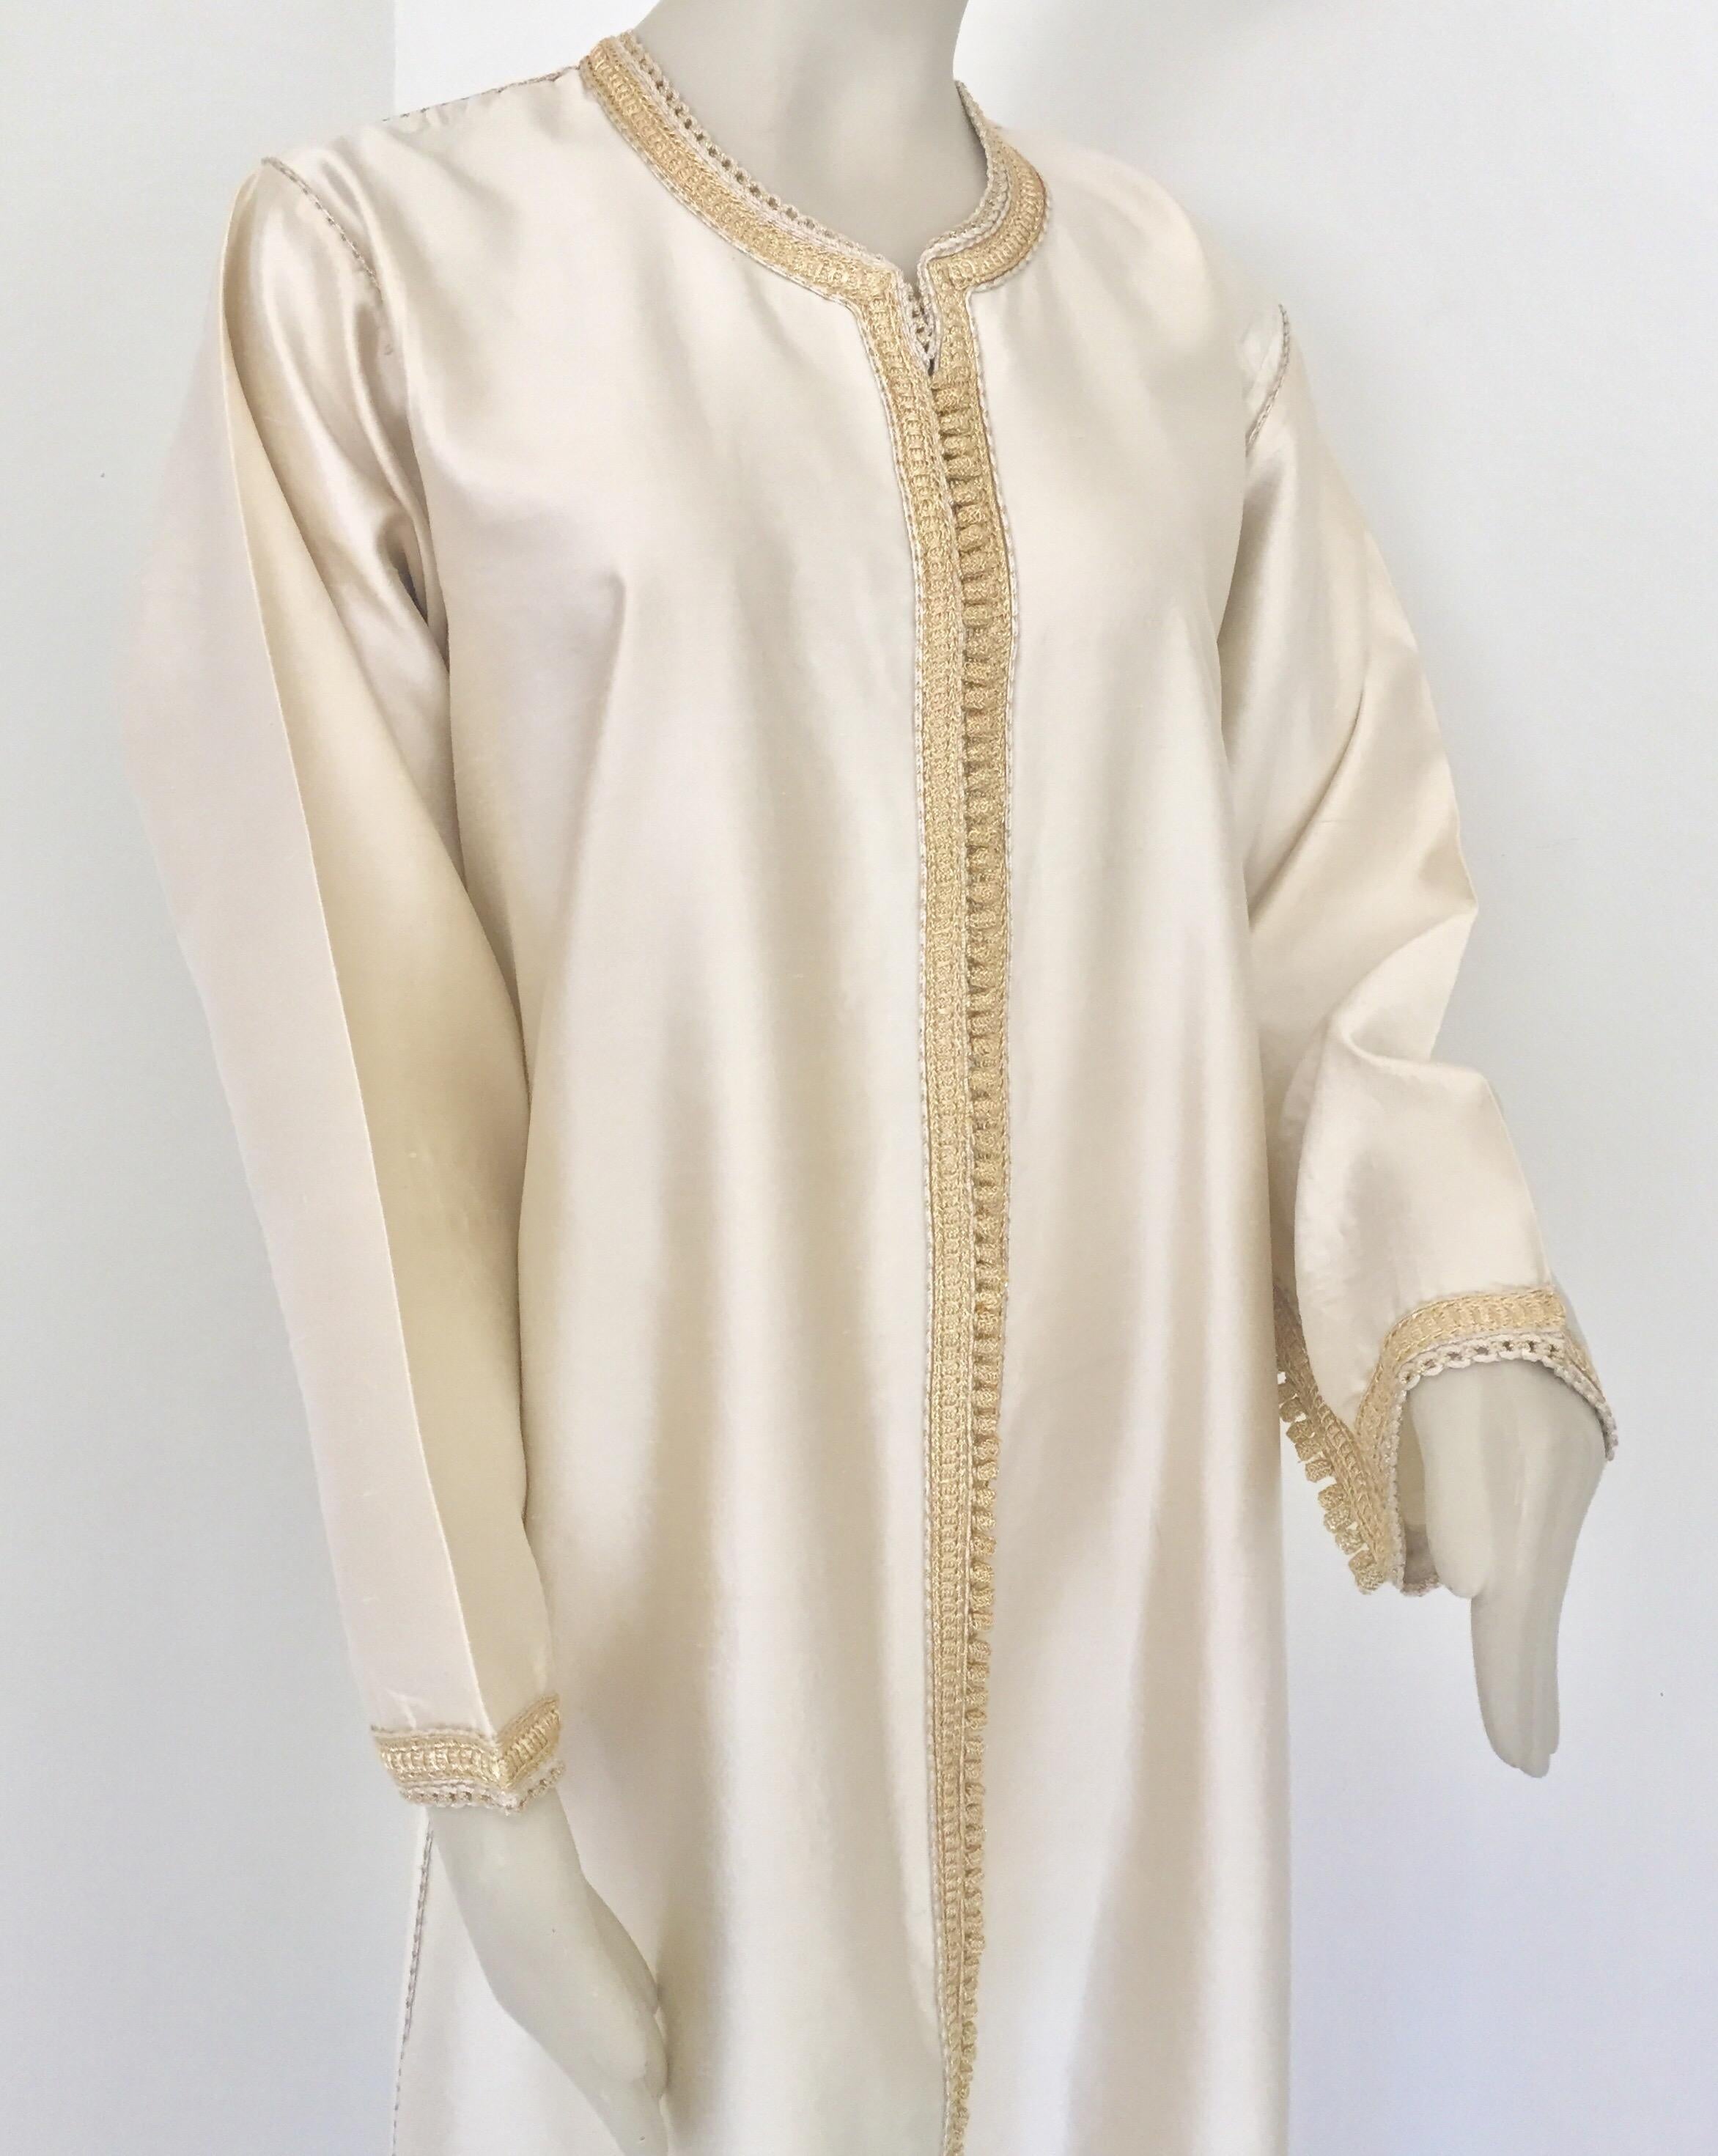 Elegant Moroccan luxury silk caftan gown.
Stunning elegant classic Dupioni silk fabric in ivory color. easy light to wear around the house or at a party.
This long maxi dress kaftan is embroidered and embellished entirely by hand.
One of a kind